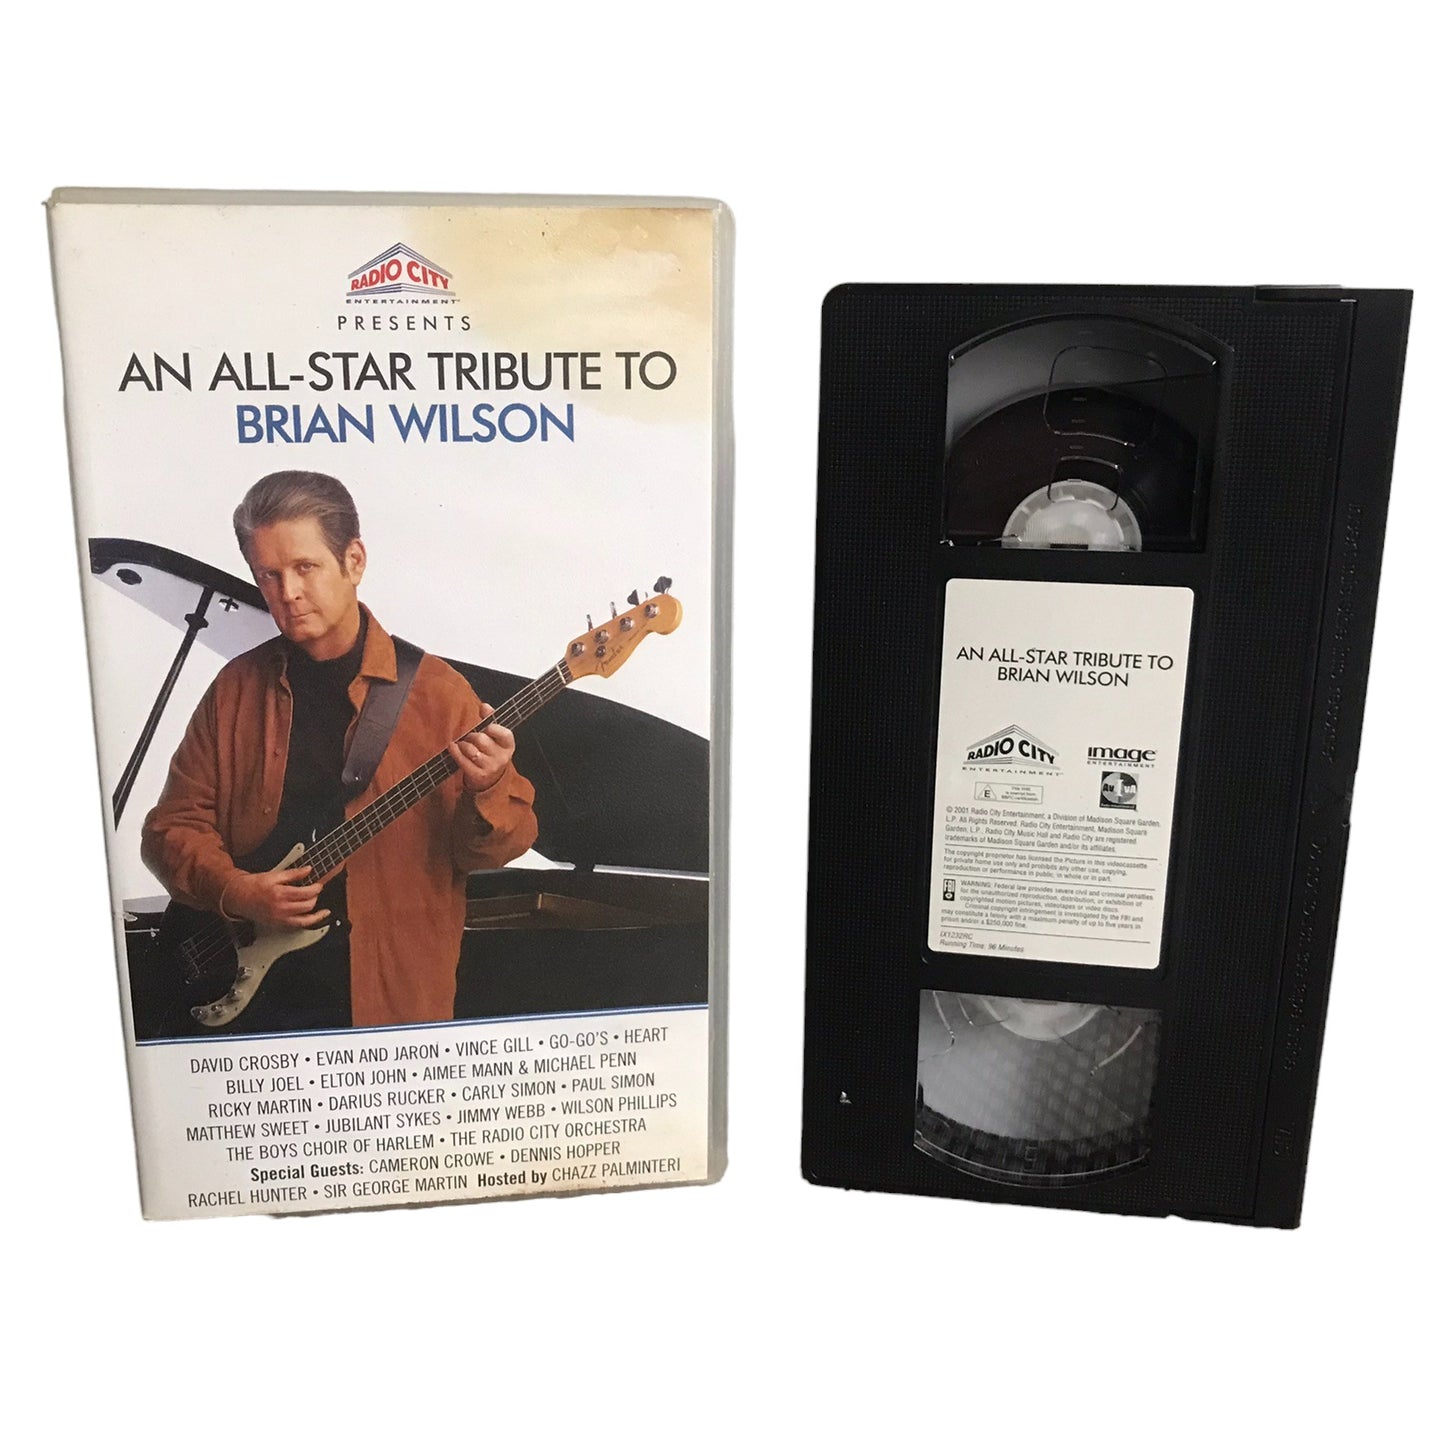 An All Star Tribute to Brian Wilson - Charlotte Caffey - Radio City - Music - Pal - VHS-